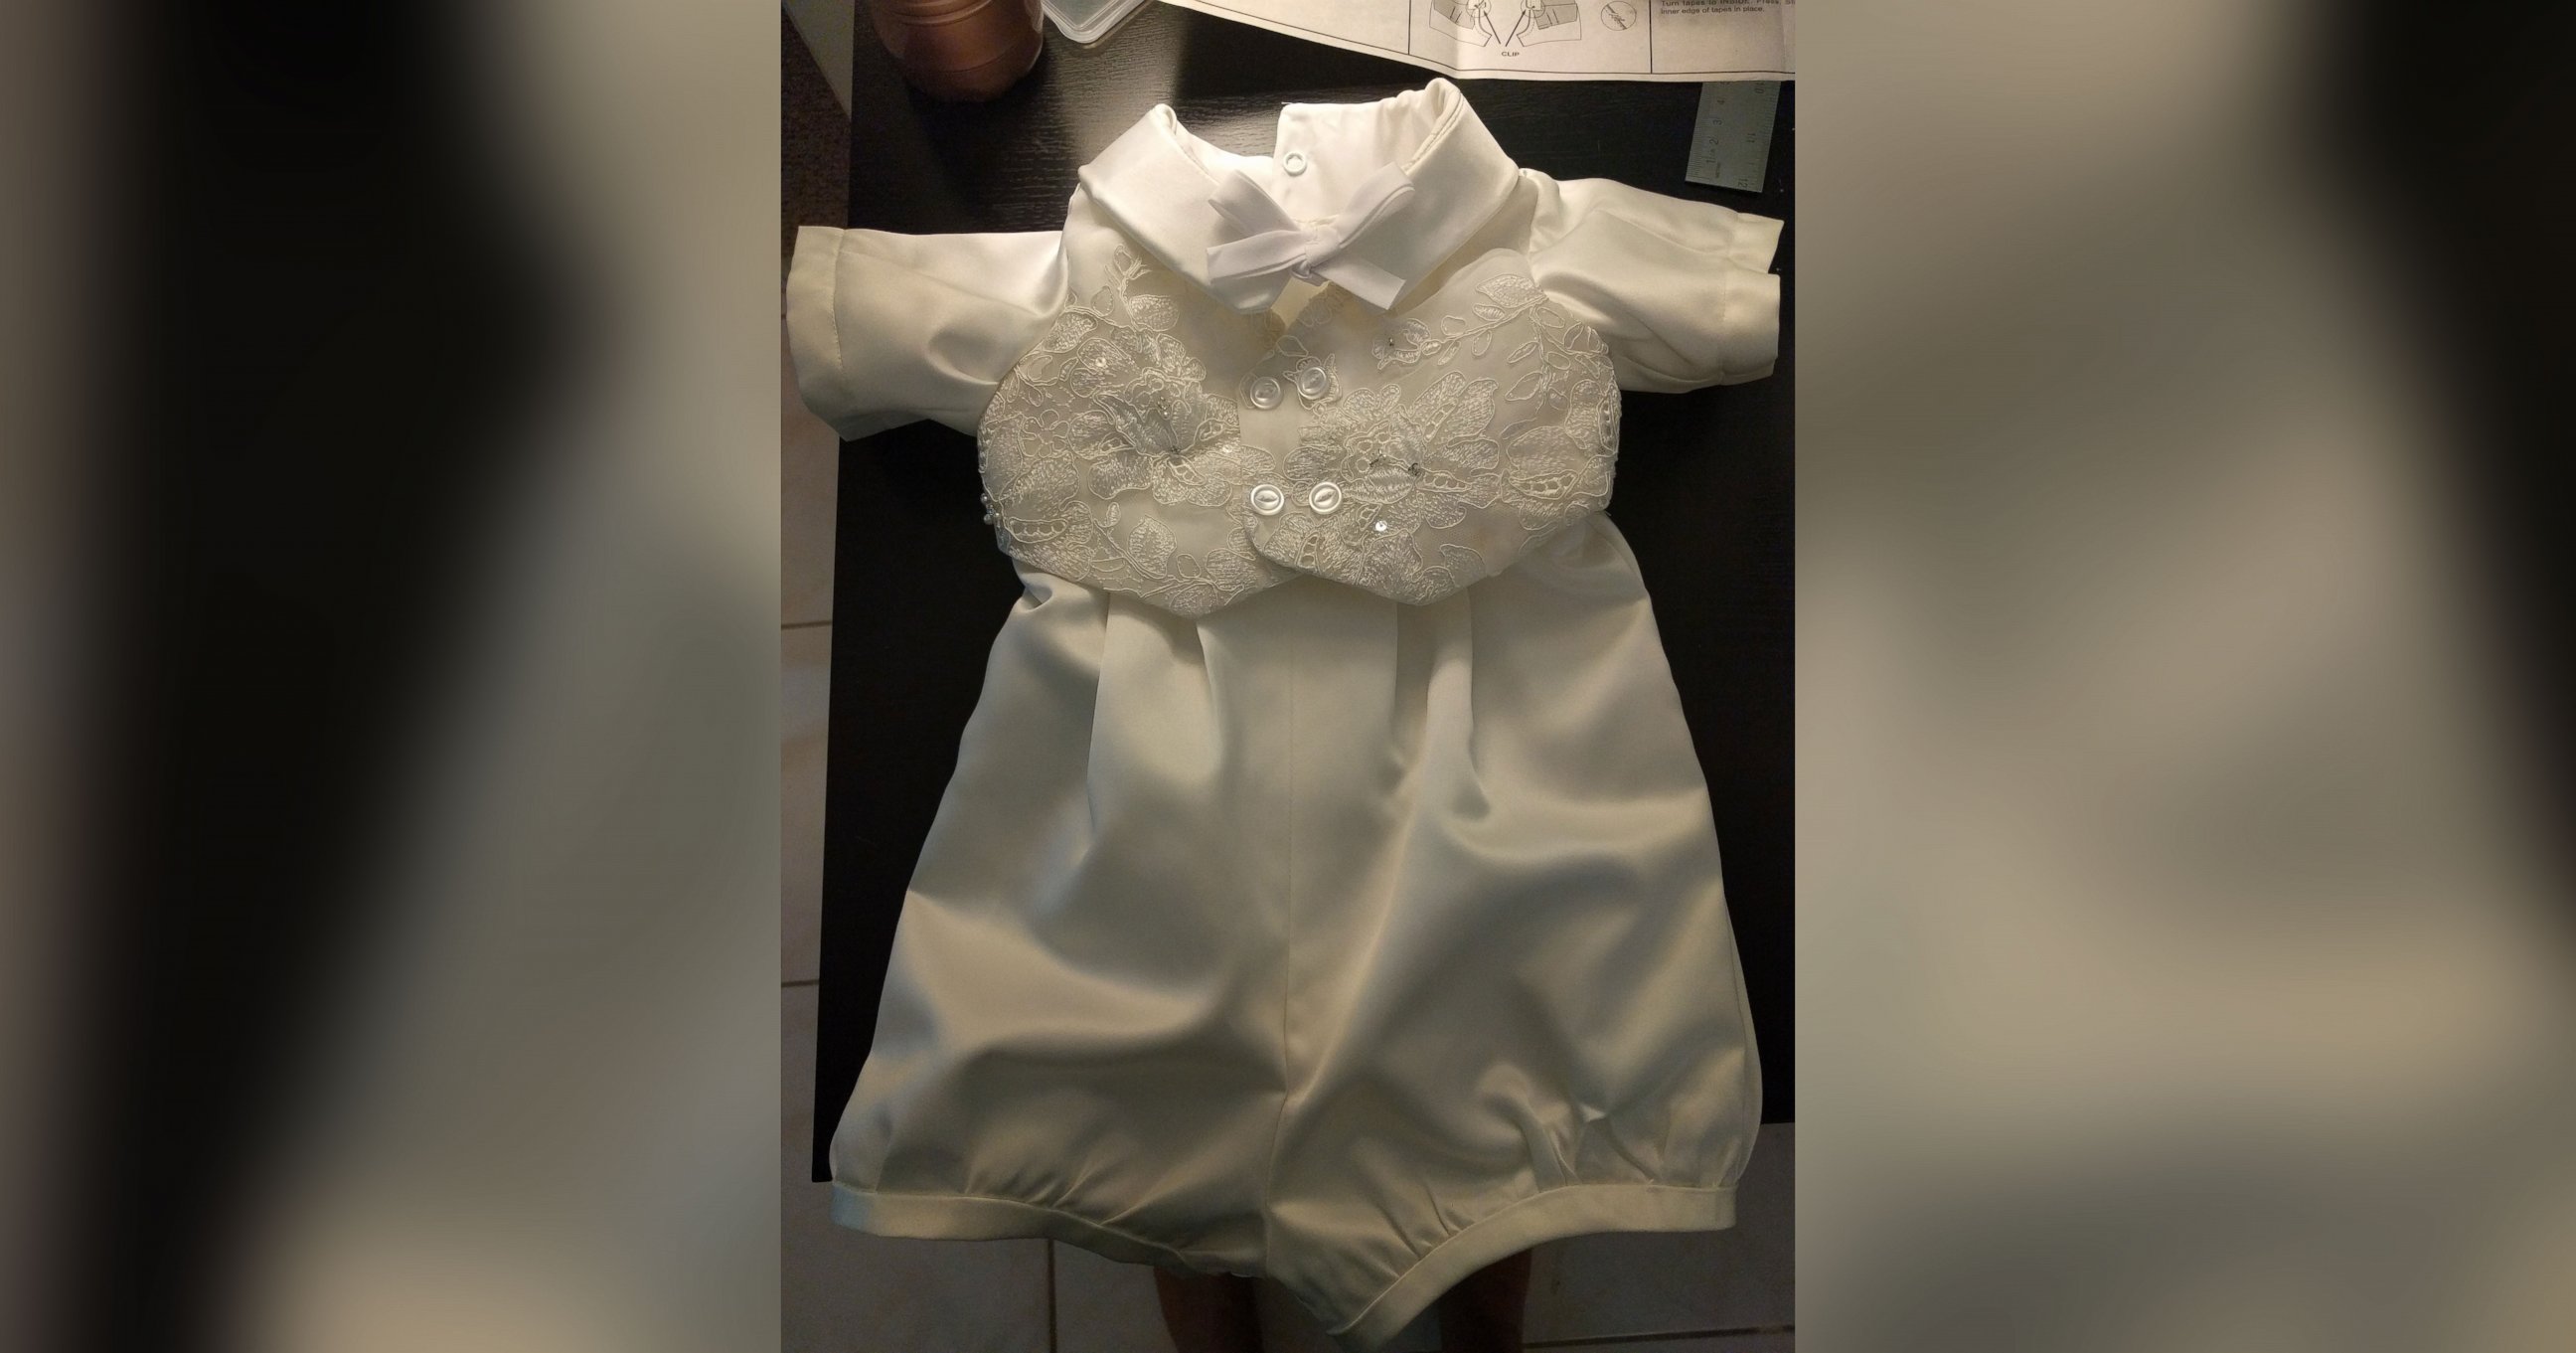 Woman turns friend's wedding gown into baby's baptism outfit - ABC News